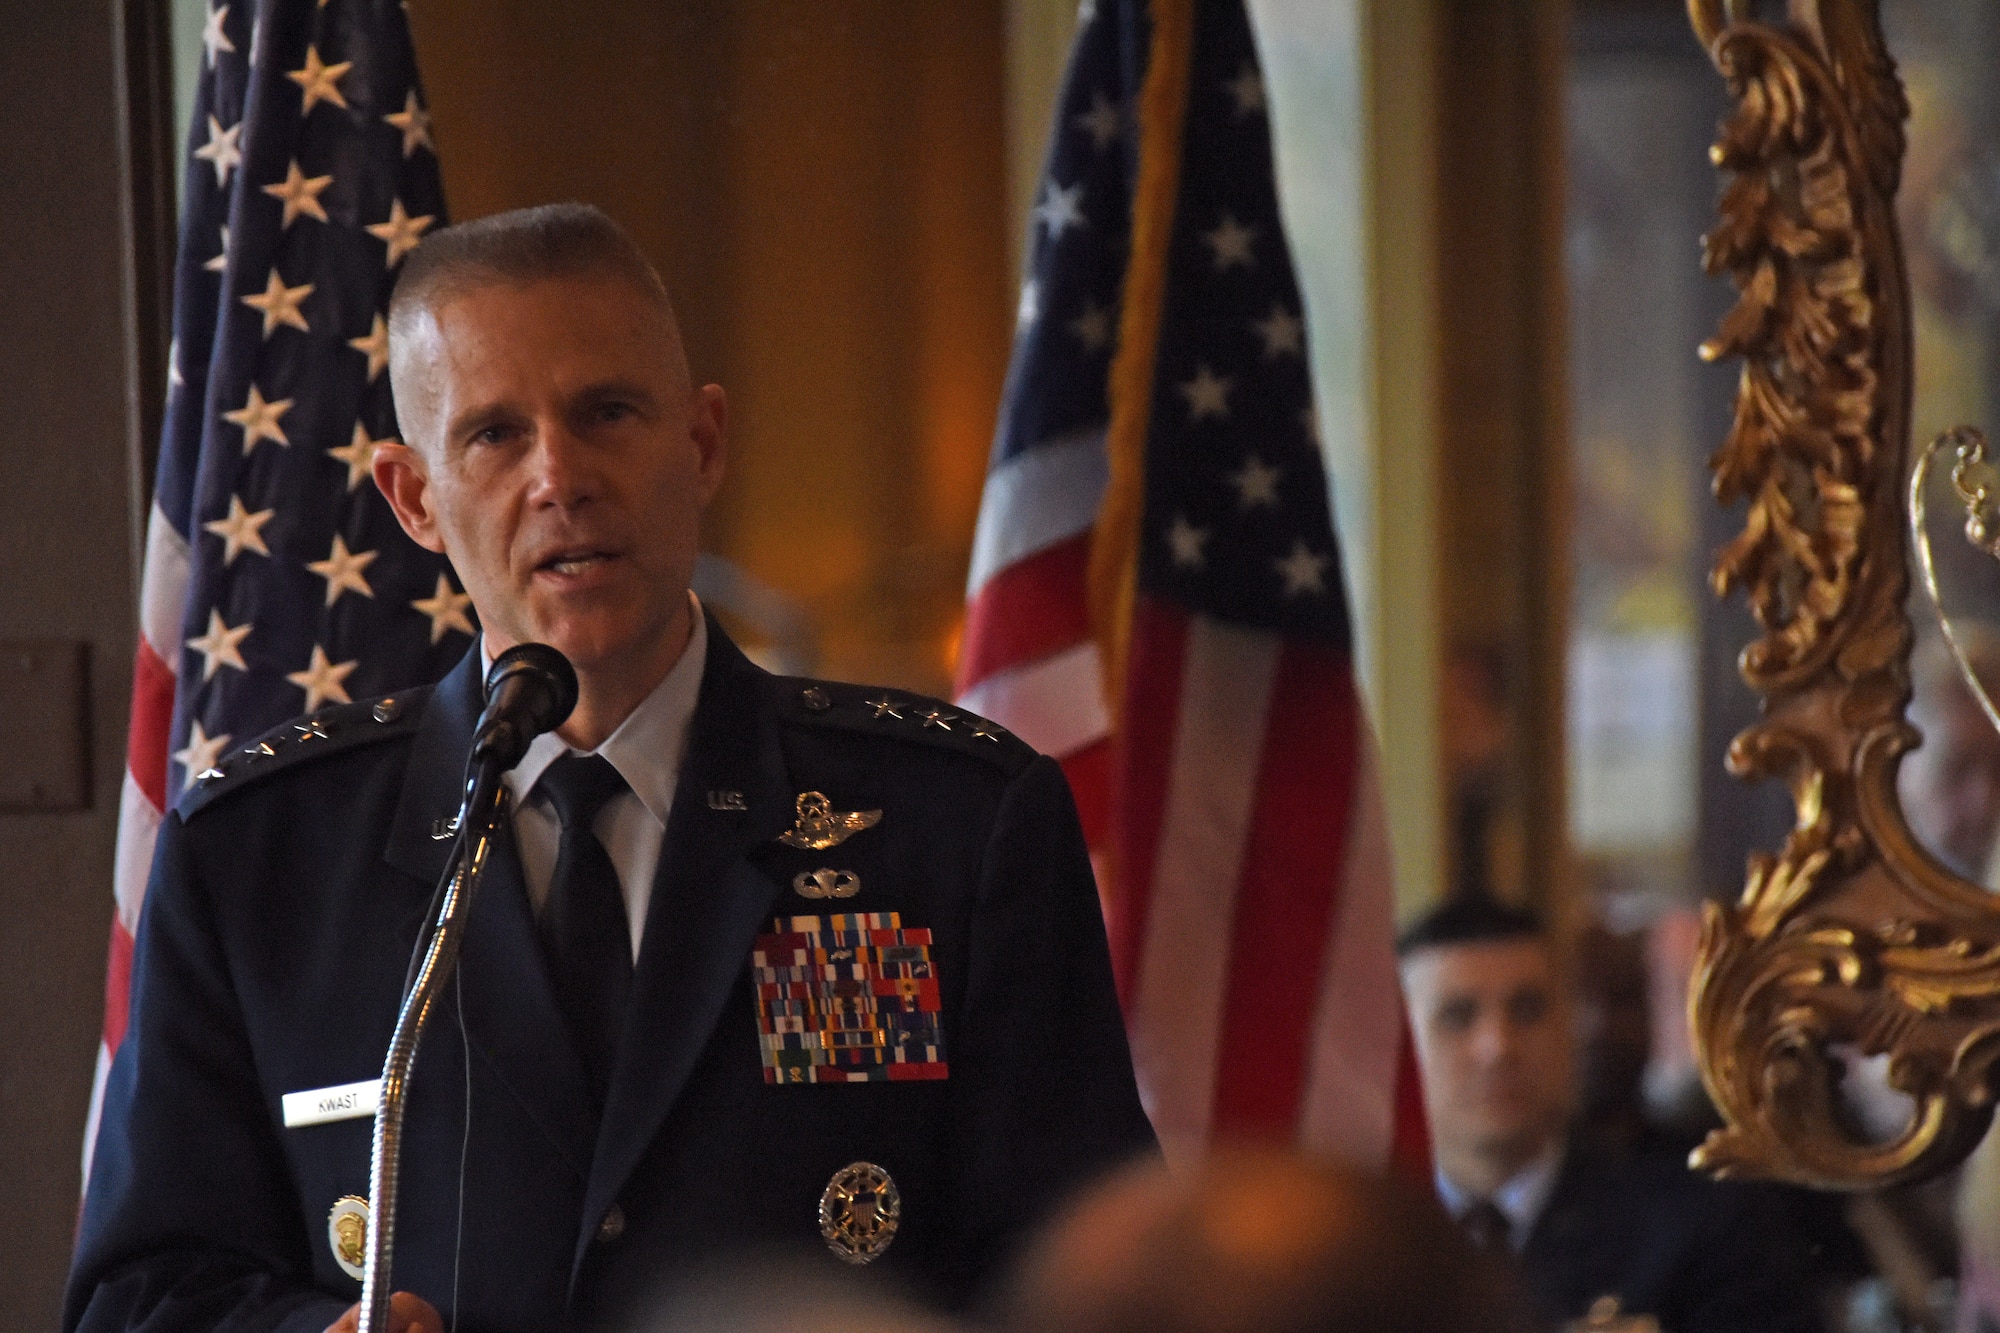 U.S. Air Force Lt. Gen. Steve Kwast, commander of Air Education and Training Command, speaks during dinner with San Angelo and Goodfellow leaders, before the presentation of the Altus Trophy at the Riverview Restaurant in San Angelo, Texas, March 20, 2019. This is the second time that San Angelo has won the Air Education and Training Command Community Support Award. (U.S. Air Force photo by Senior Airman Seraiah Hines/Released)